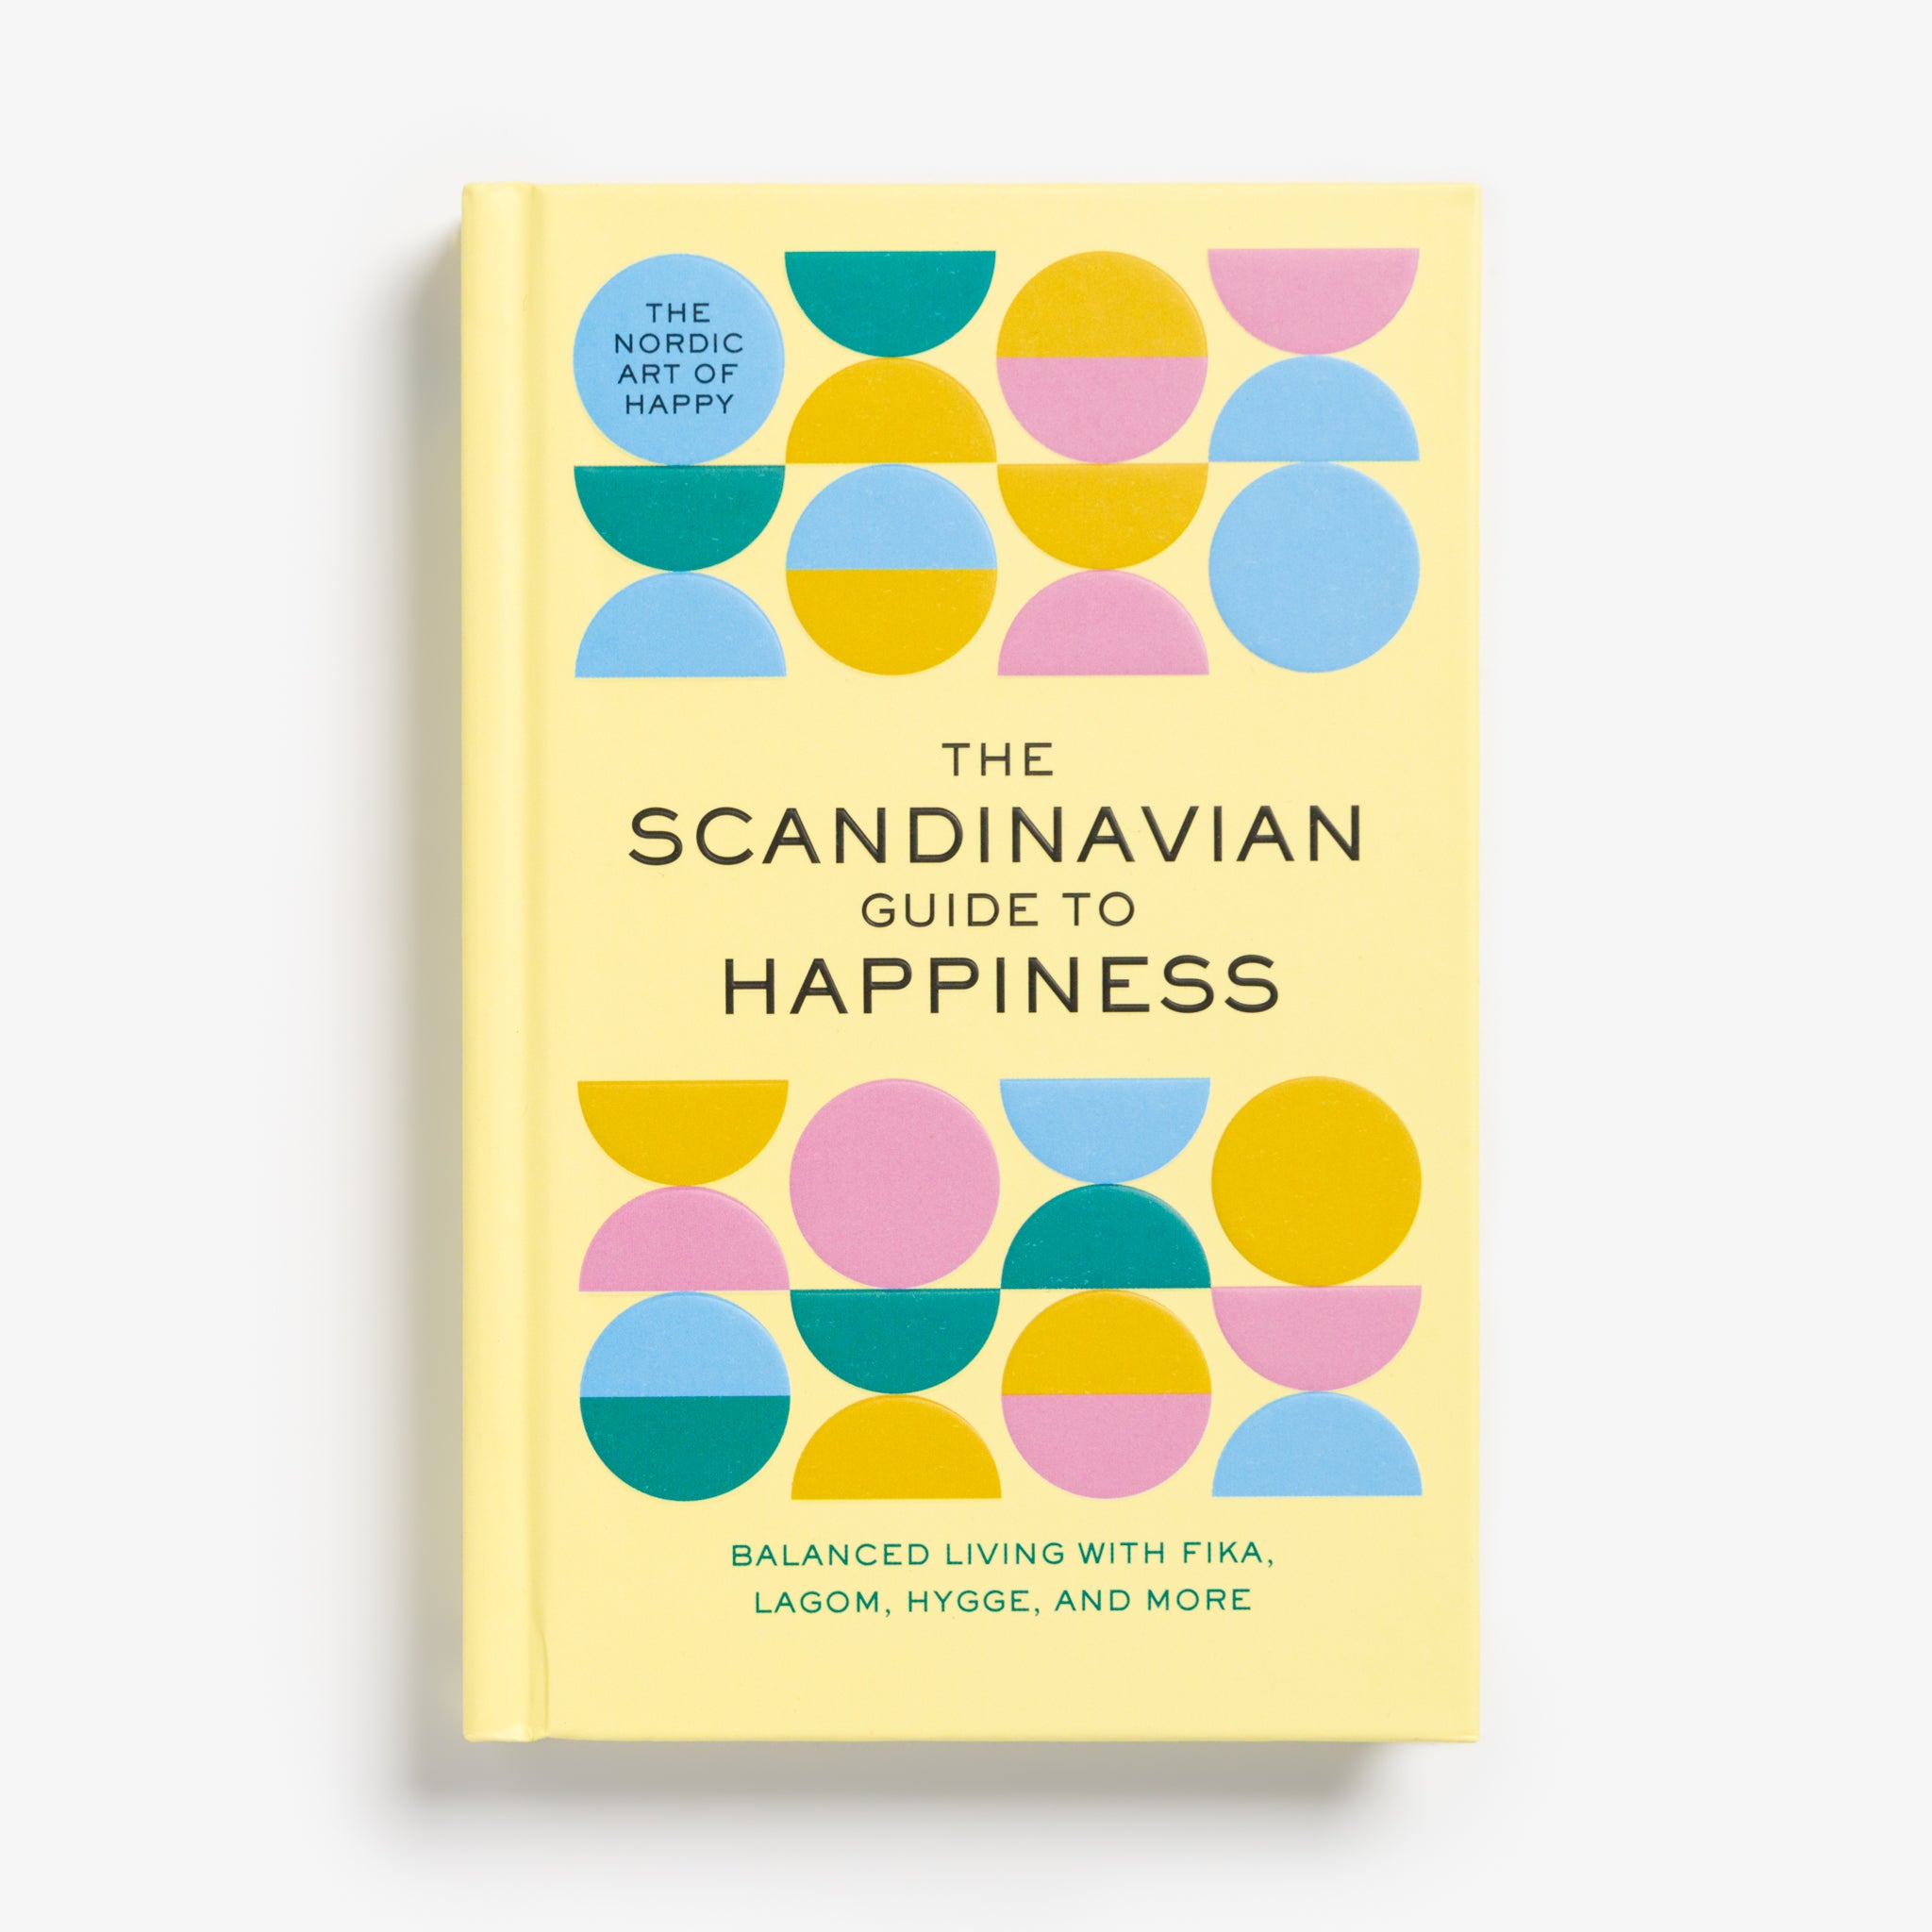 The Scandinavian Guide to Happiness by Tim Rayborn